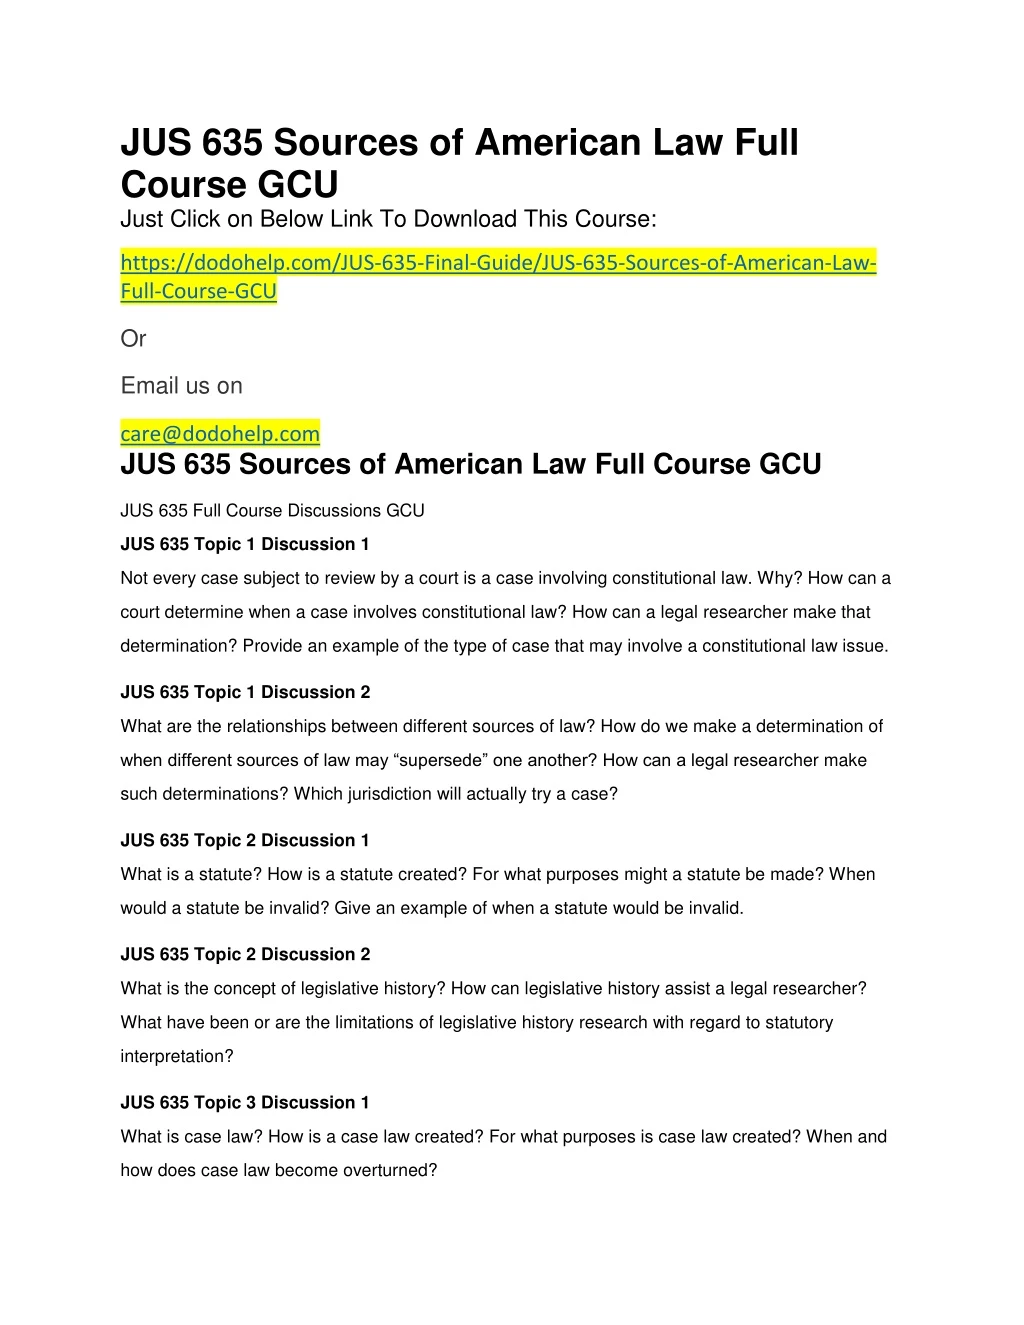 jus 635 sources of american law full course